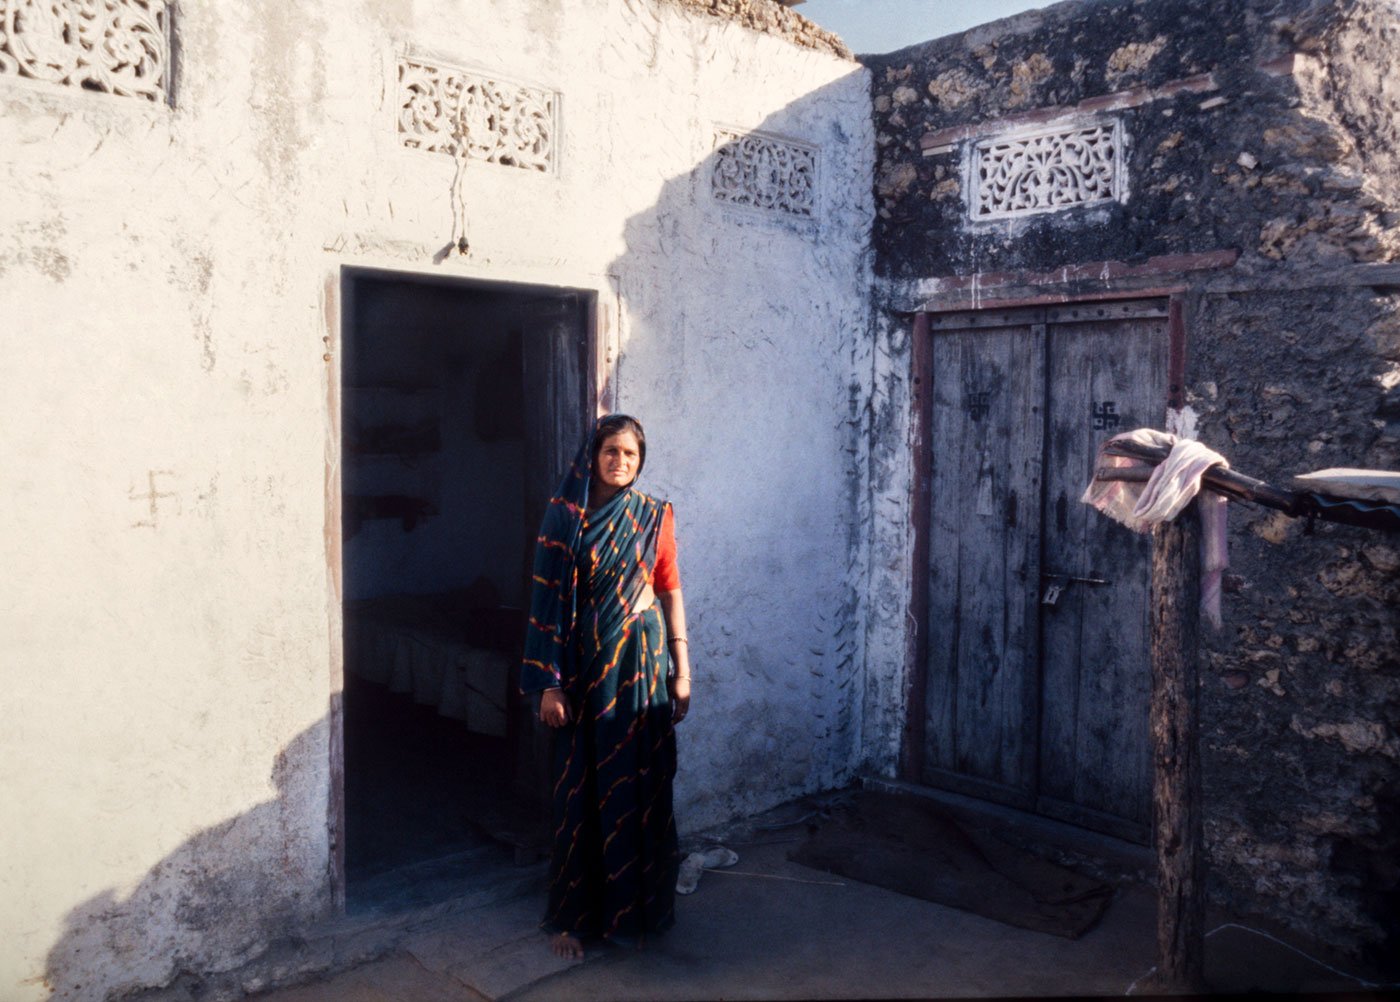 Anju Phulwaria, the persecuted sarpanch, standing outside her house